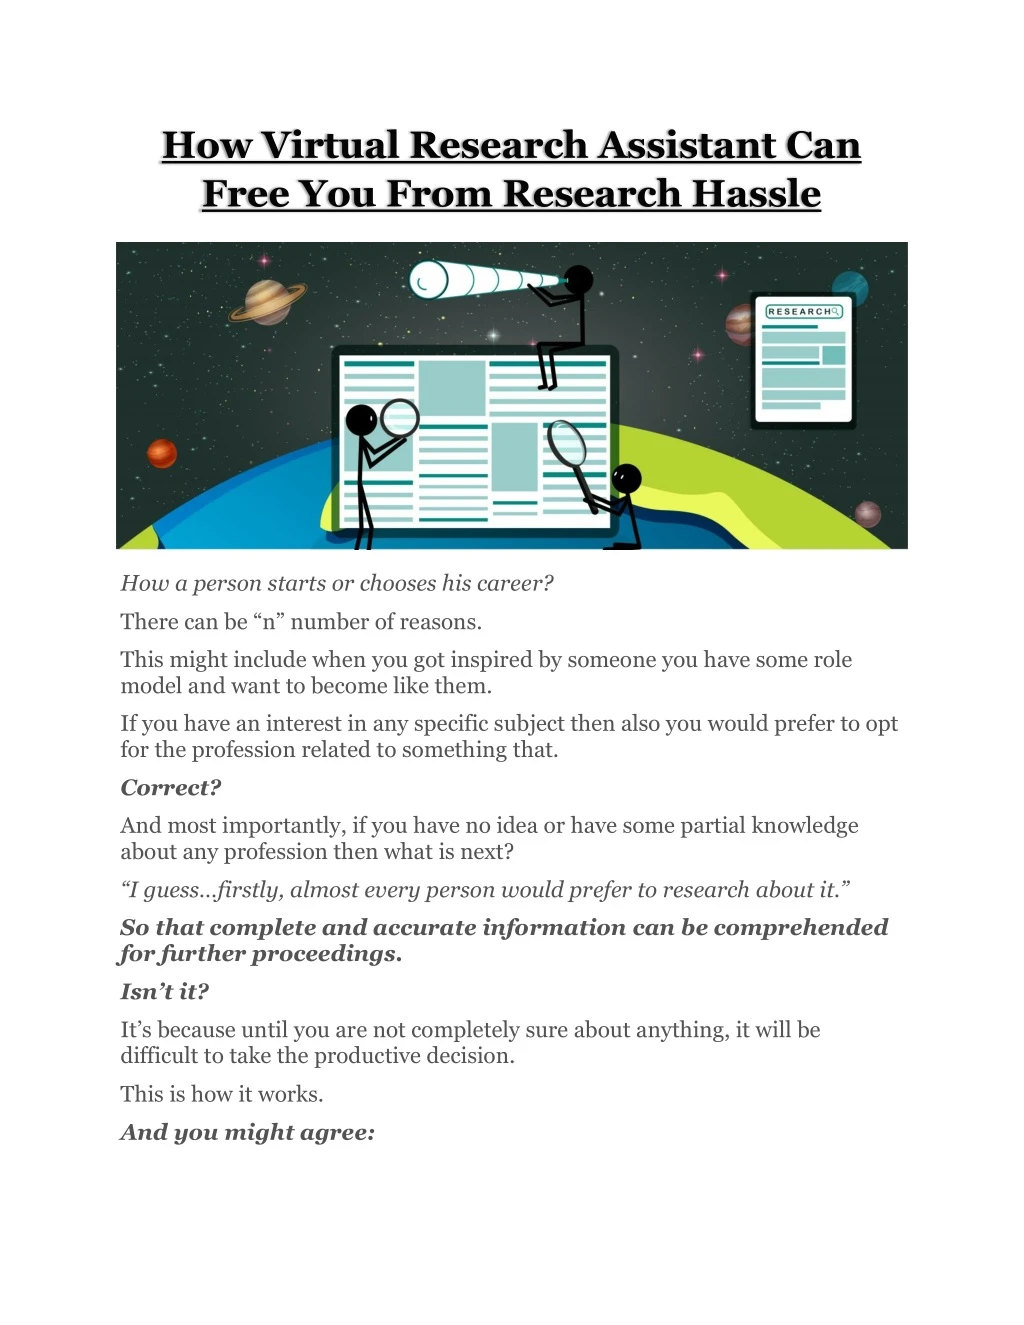 how virtual research assistant can free you from